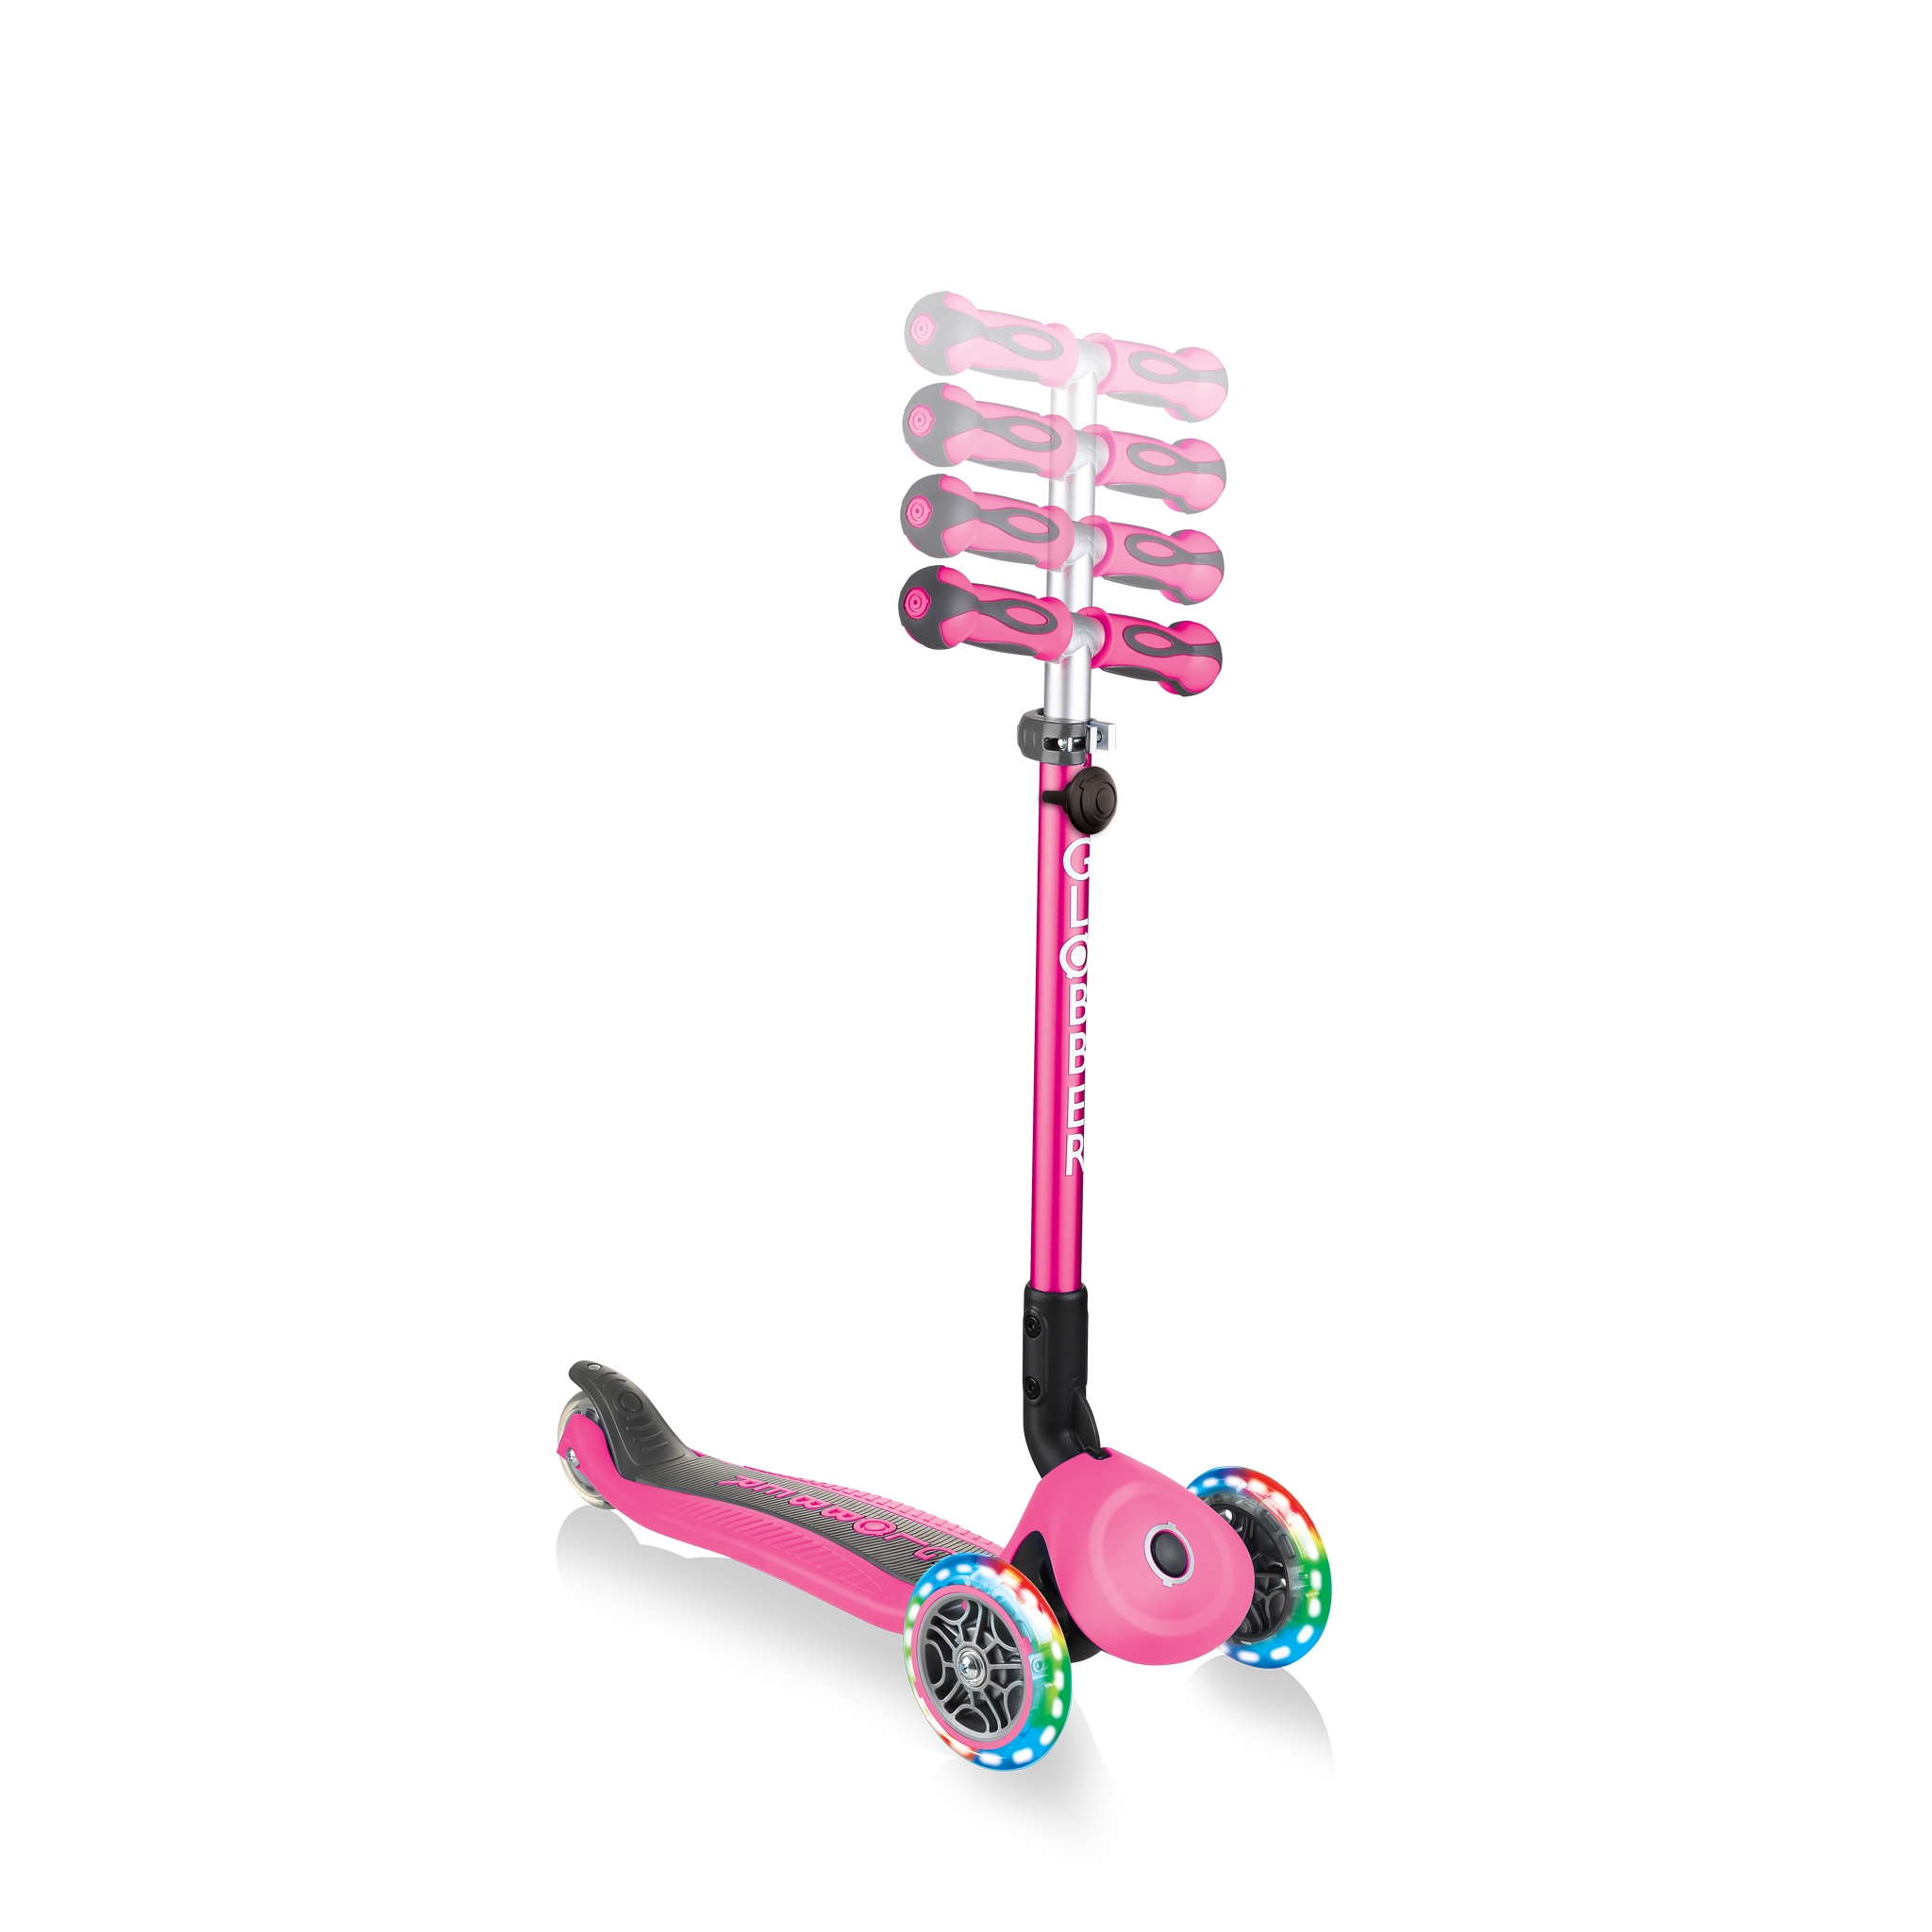 GO-UP-DELUXE-LIGHTS-ride-on-walking-bike-scooter-with-4-height-adjustable-T-bar-and-light-up-wheels-deep-pink 4